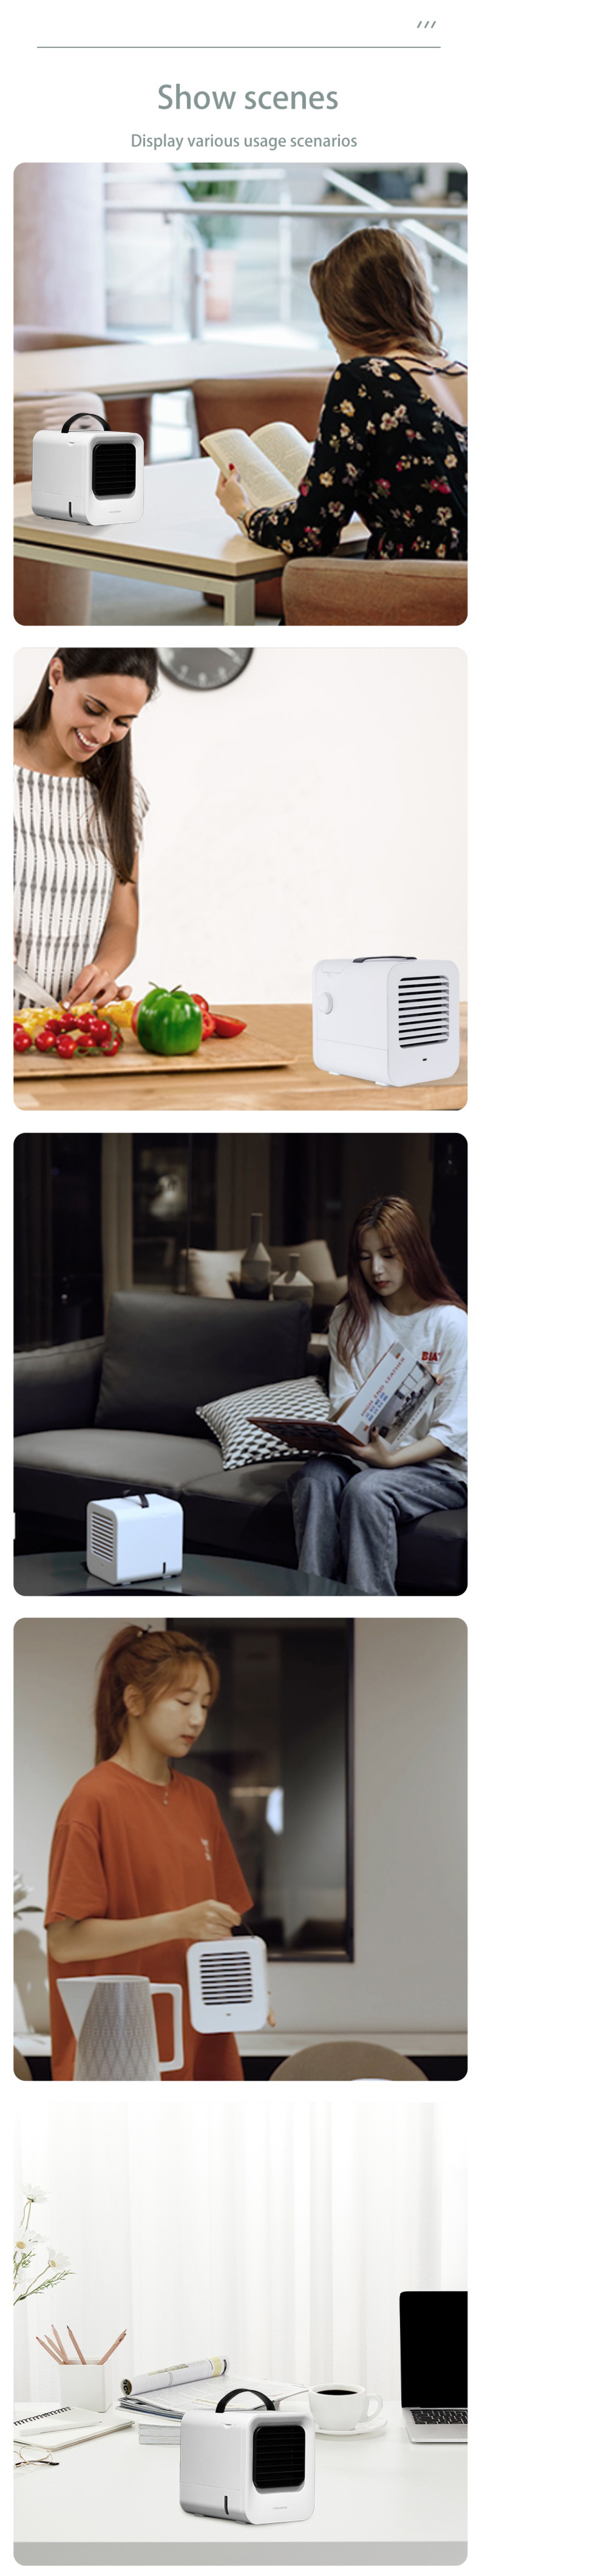 Microhoo-MH02D-Portable-USB-Air-Conditioning-4000mAh-Built-in-Battery-25ms-Cooling-Fan-Negative-Ion--1822648-10